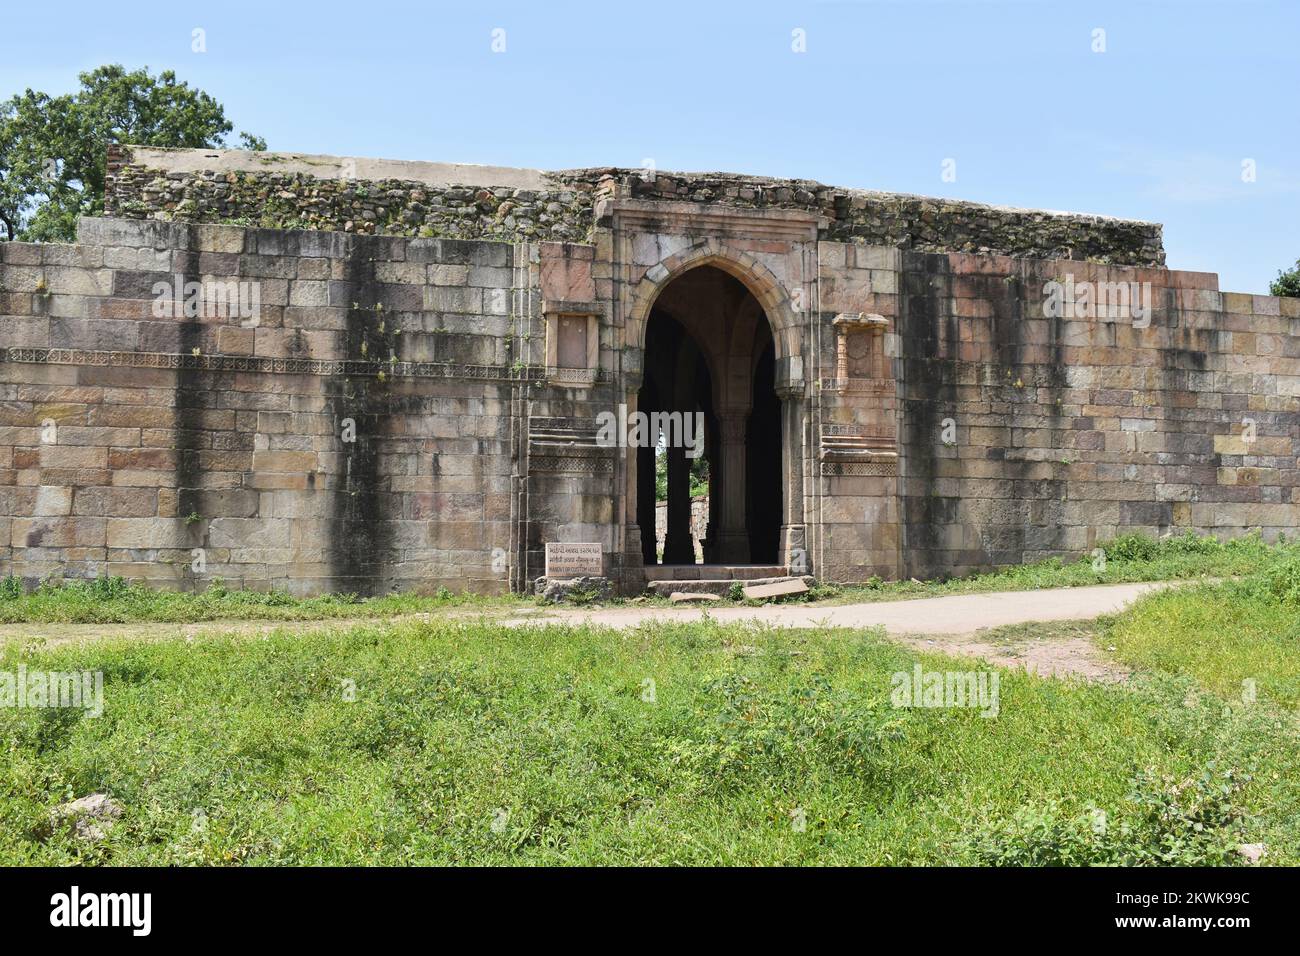 Architectural Archway to Mandvi or Custom House, built in stone and carvings details, was built by Sultan Mahmud Begada 15th - 16th century. A UNESCO Stock Photo